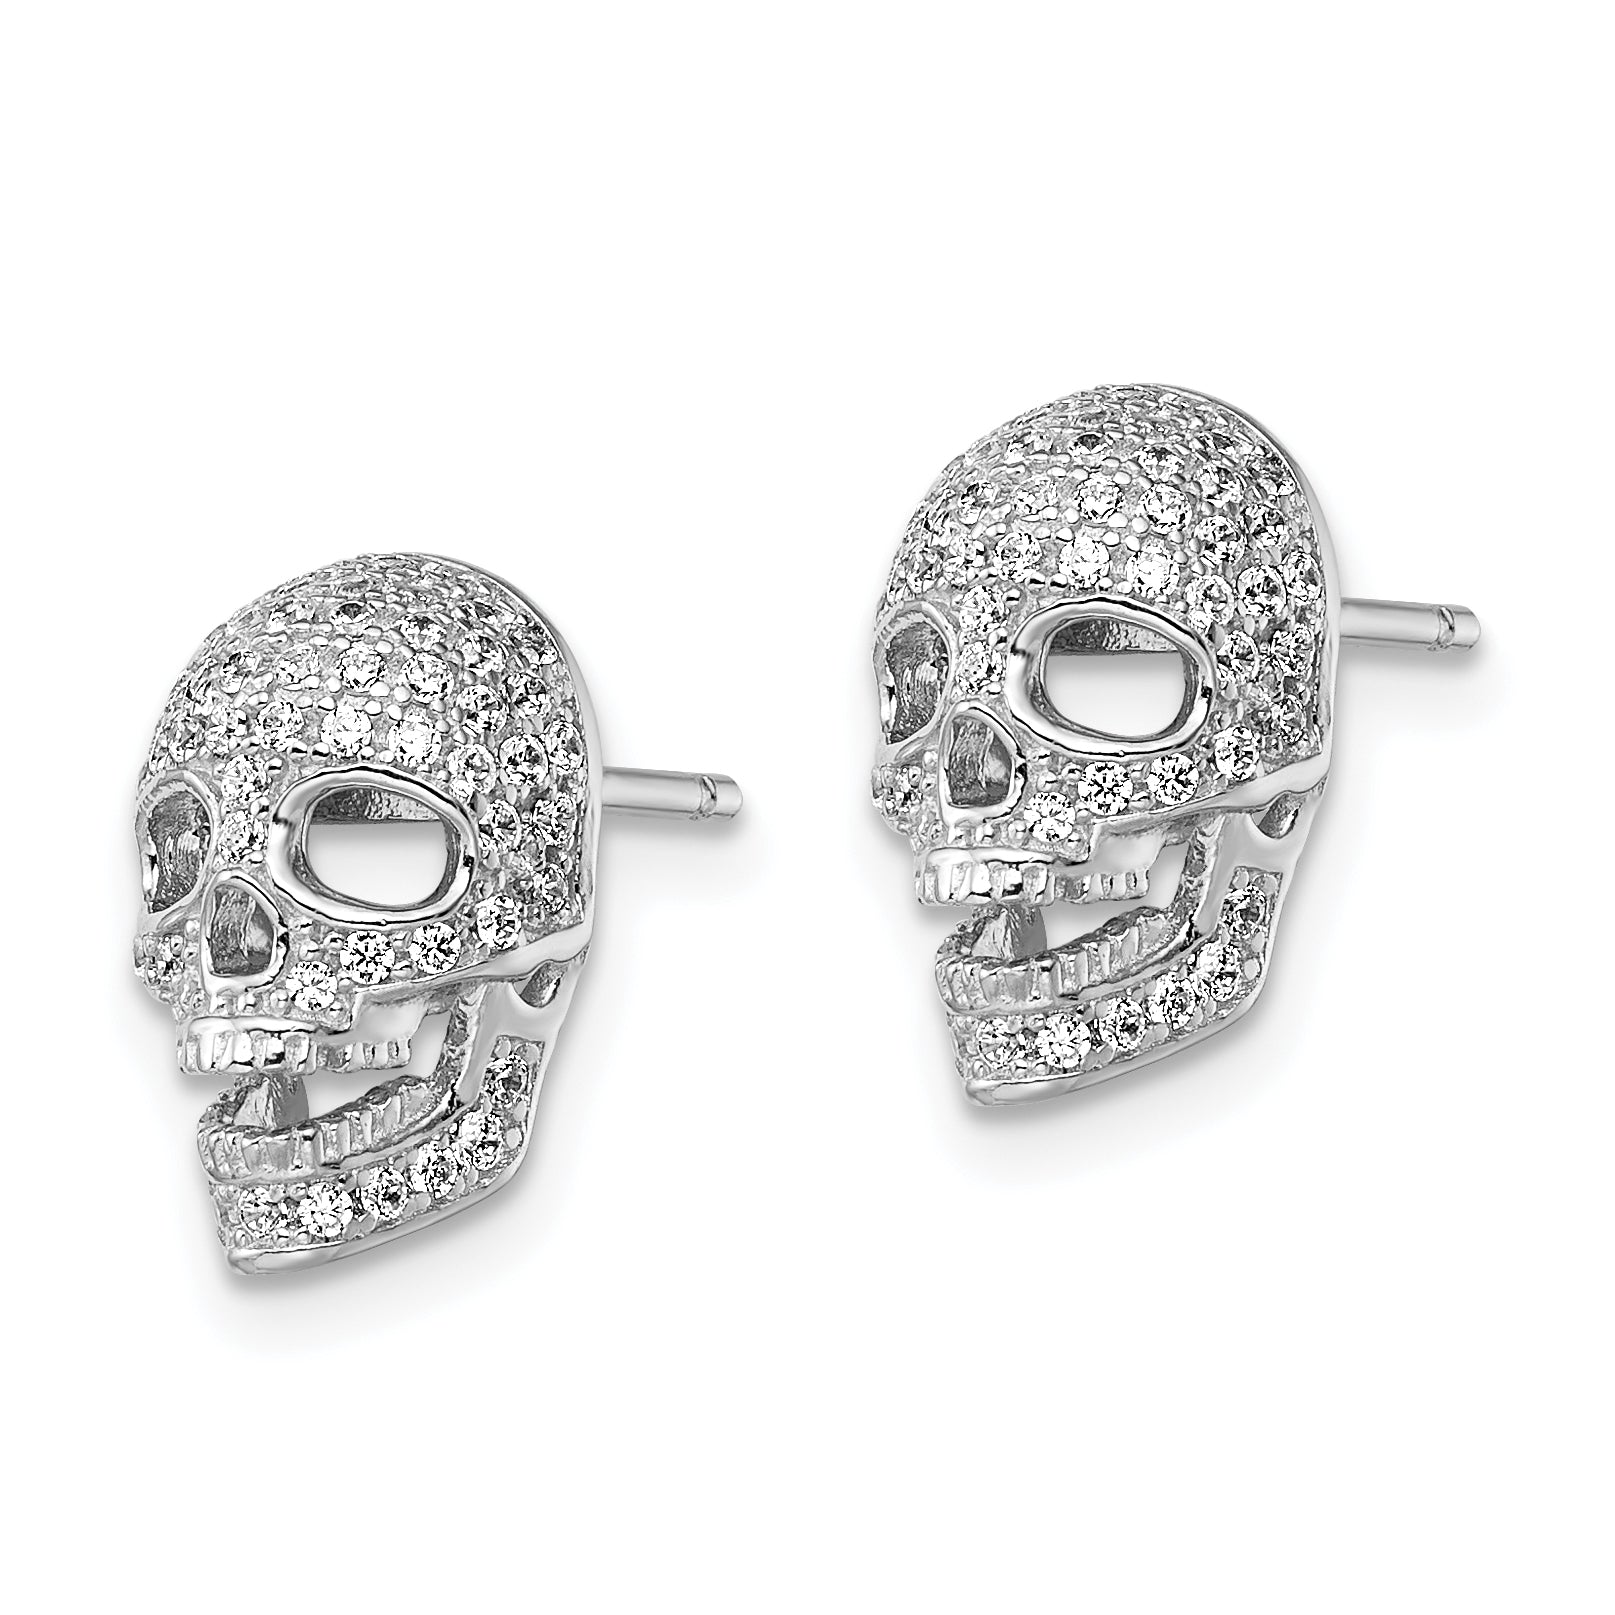 Brilliant Embers Sterling Silver Rhodium-plated 140 Stone Micro Pav‚ CZ Polished Skull Post Earrings